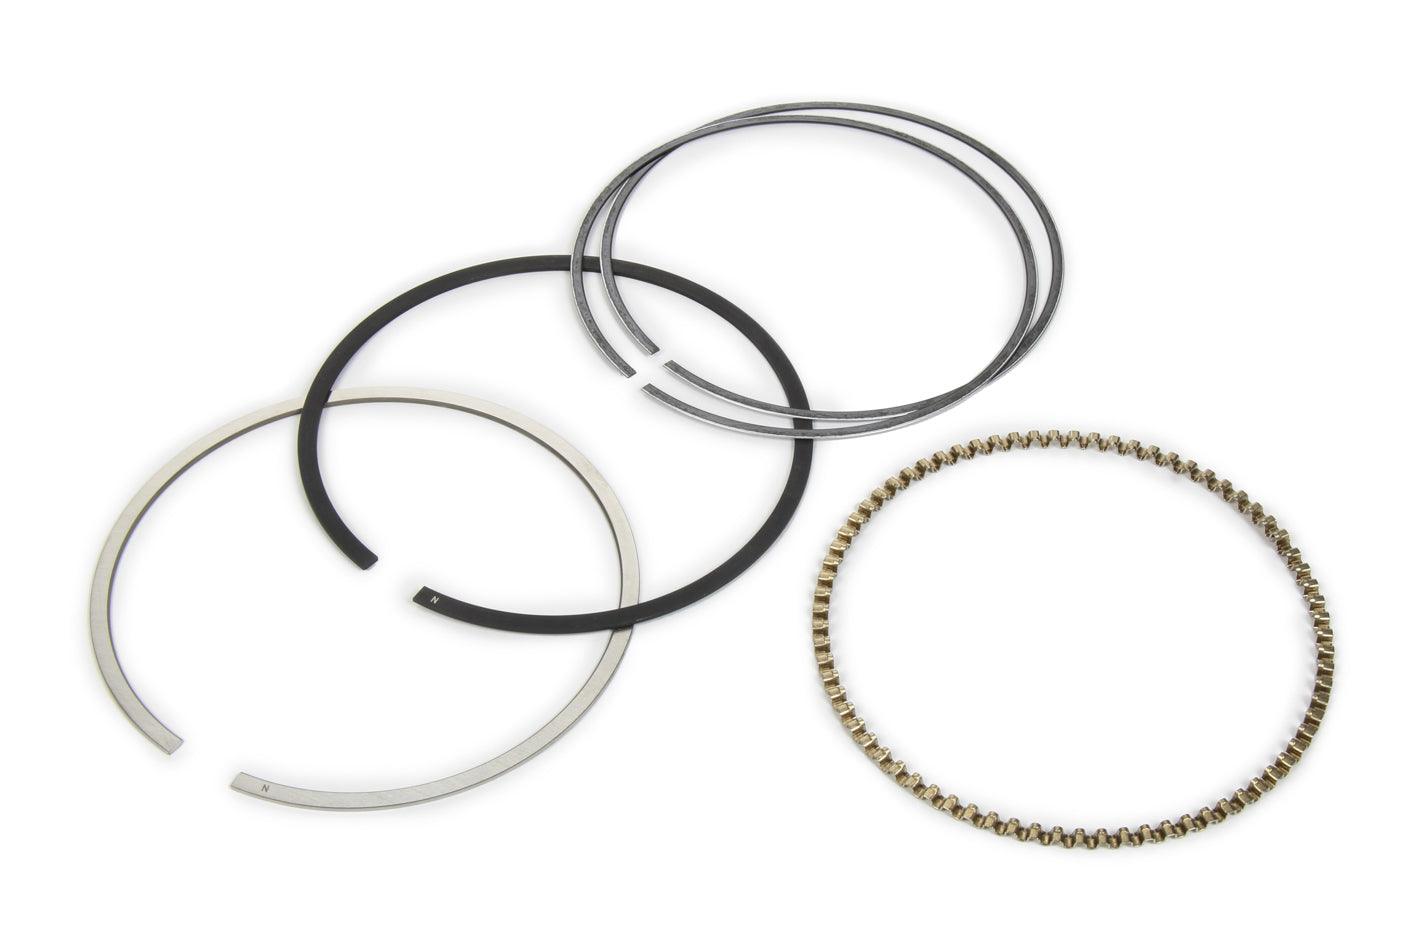 Piston Ring - 1 Cylinder 101.778mm (4.005) - Burlile Performance Products